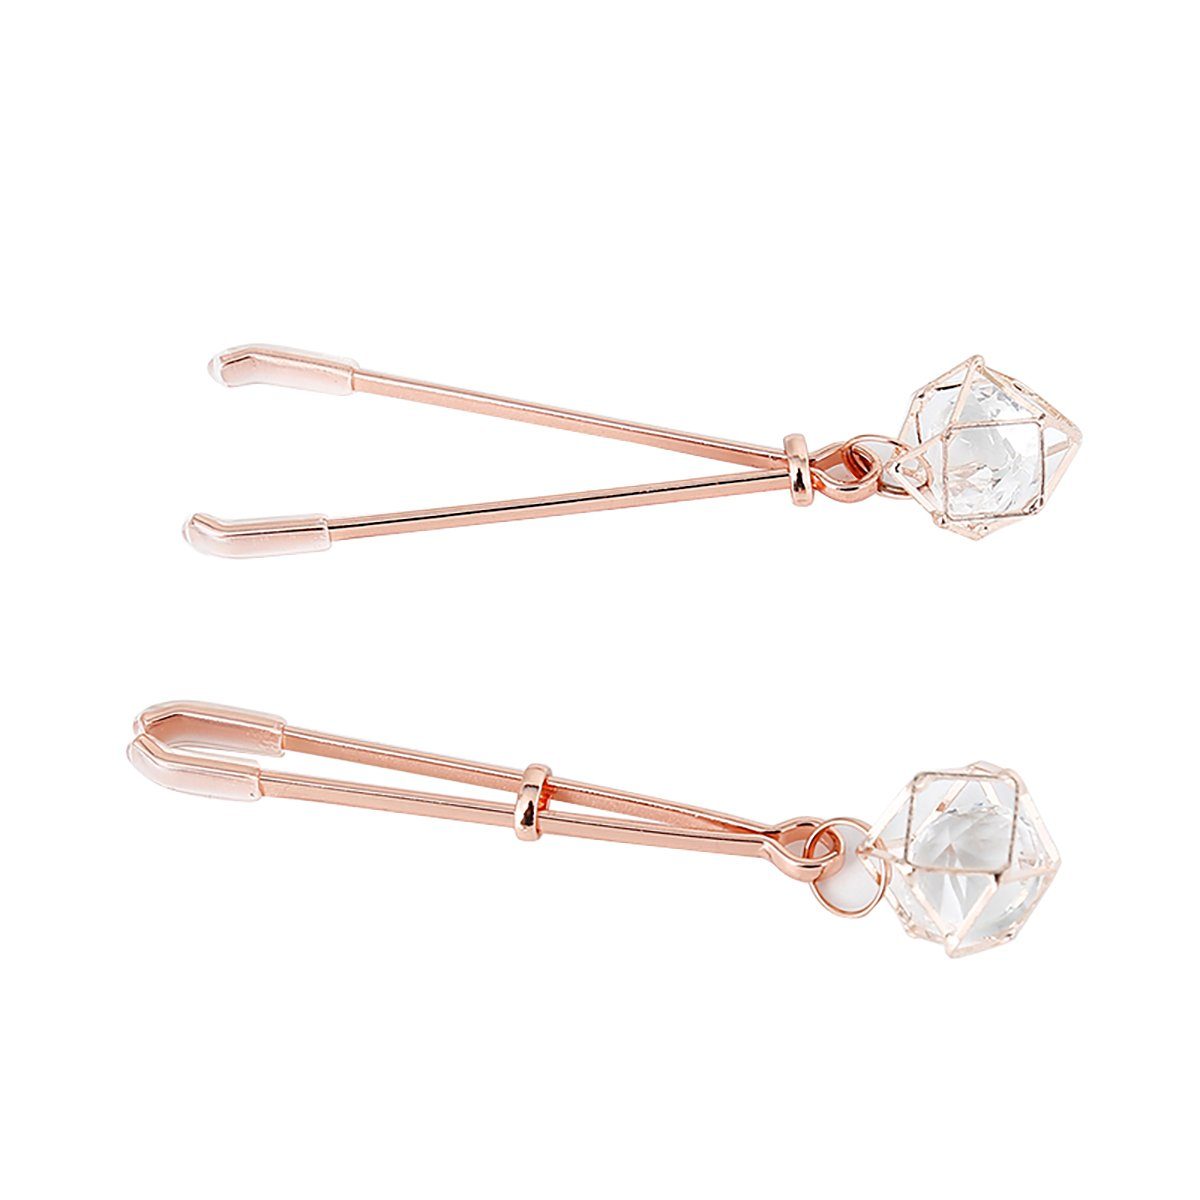 KIOTOS Nippelklemme Gold Nipple Prism, Rose Clamps (2-tlg)